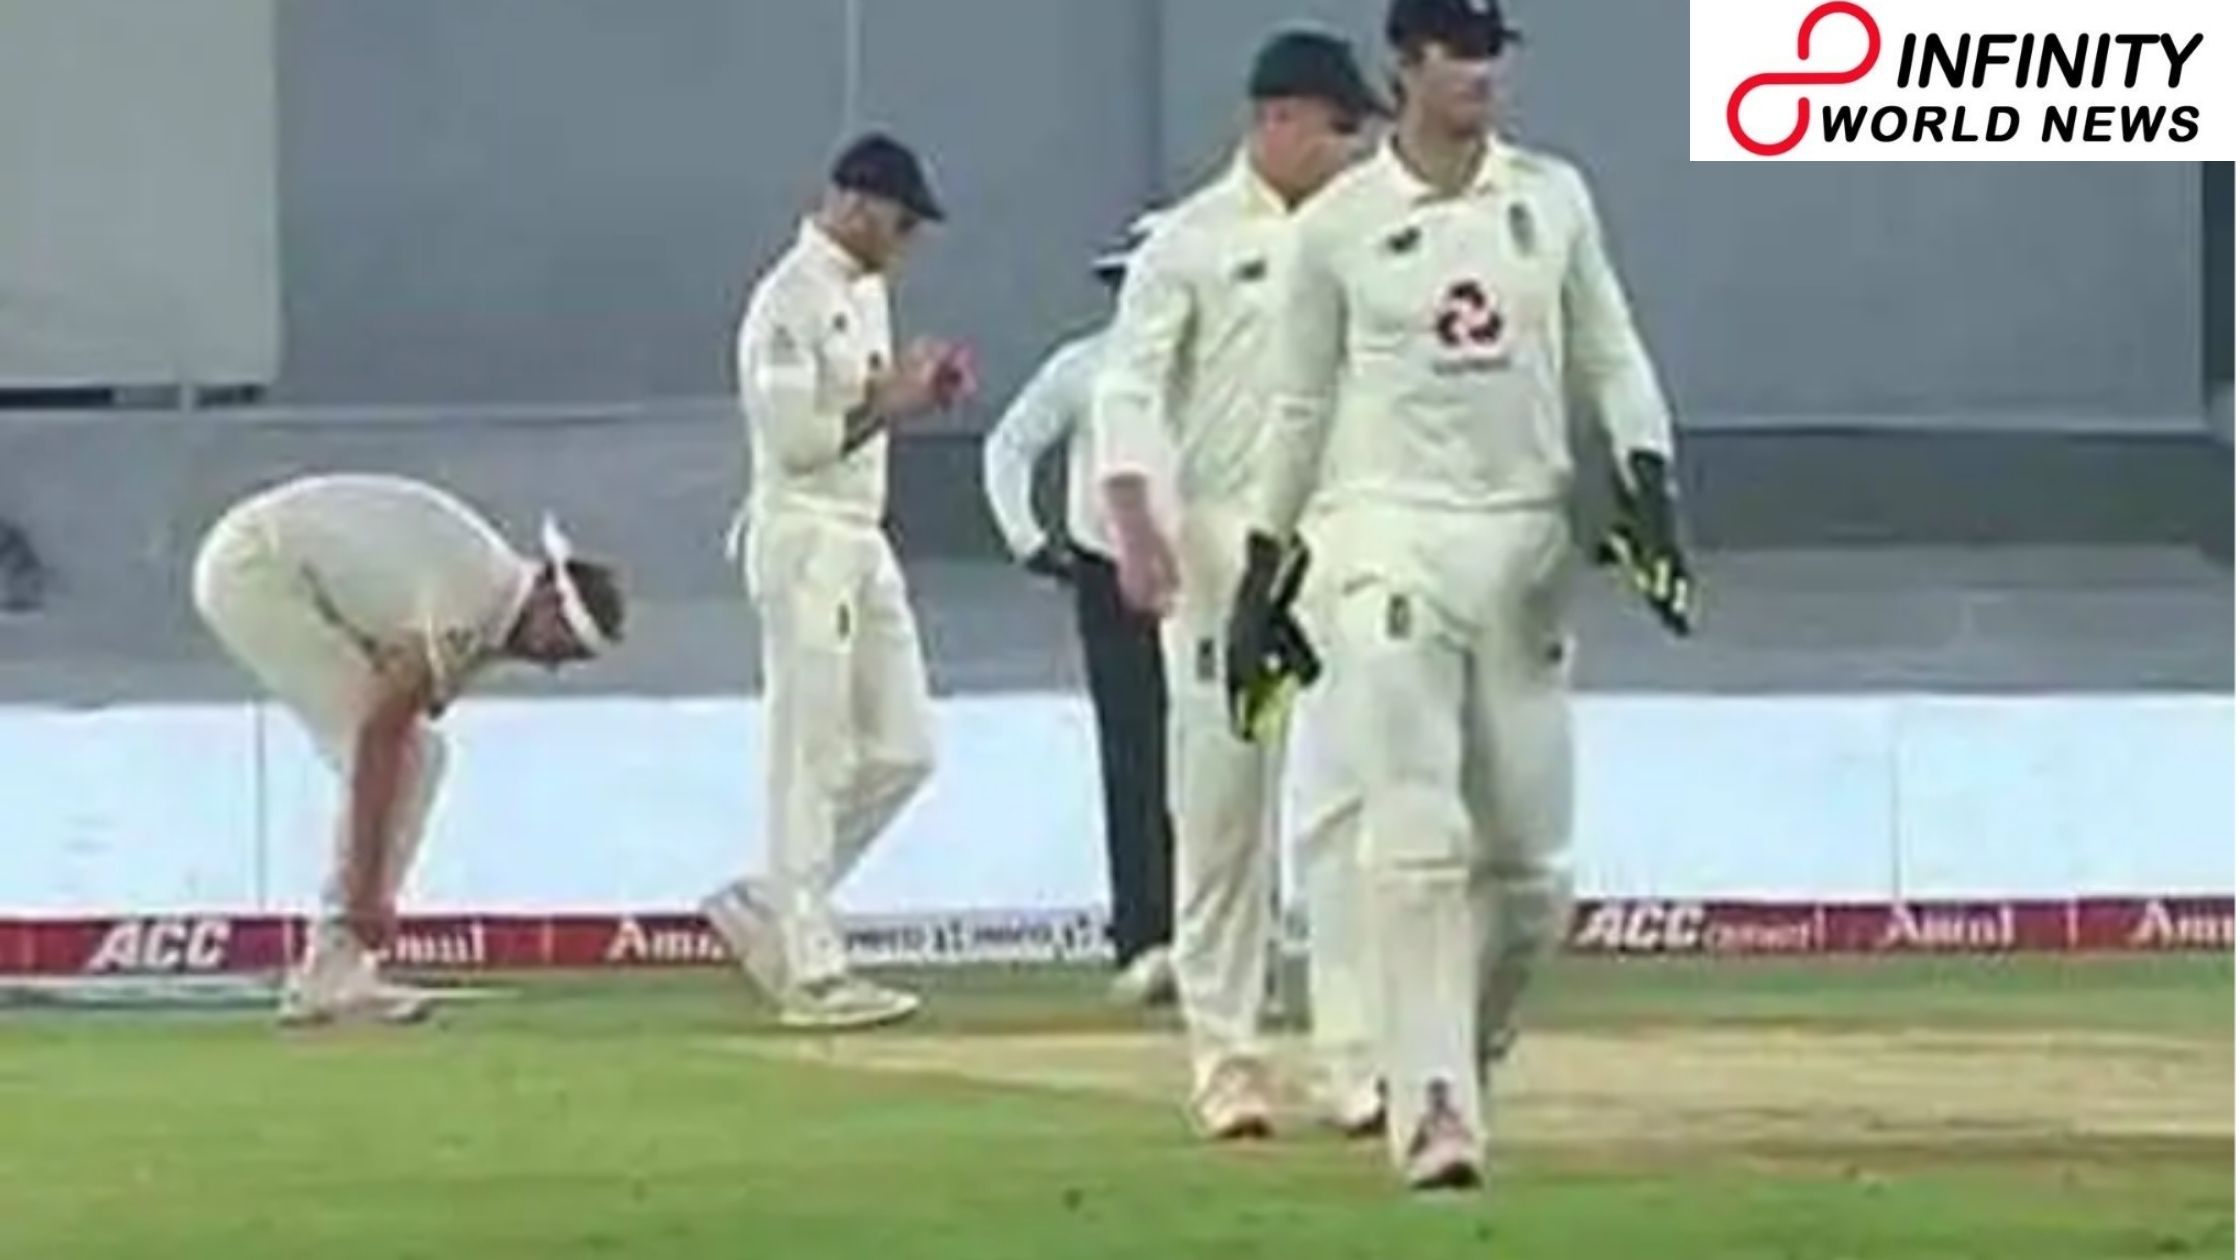 Ben Stokes Applies Saliva at Ball During Pink-Ball Test on Motera, Umpire Cautions English All-rounder